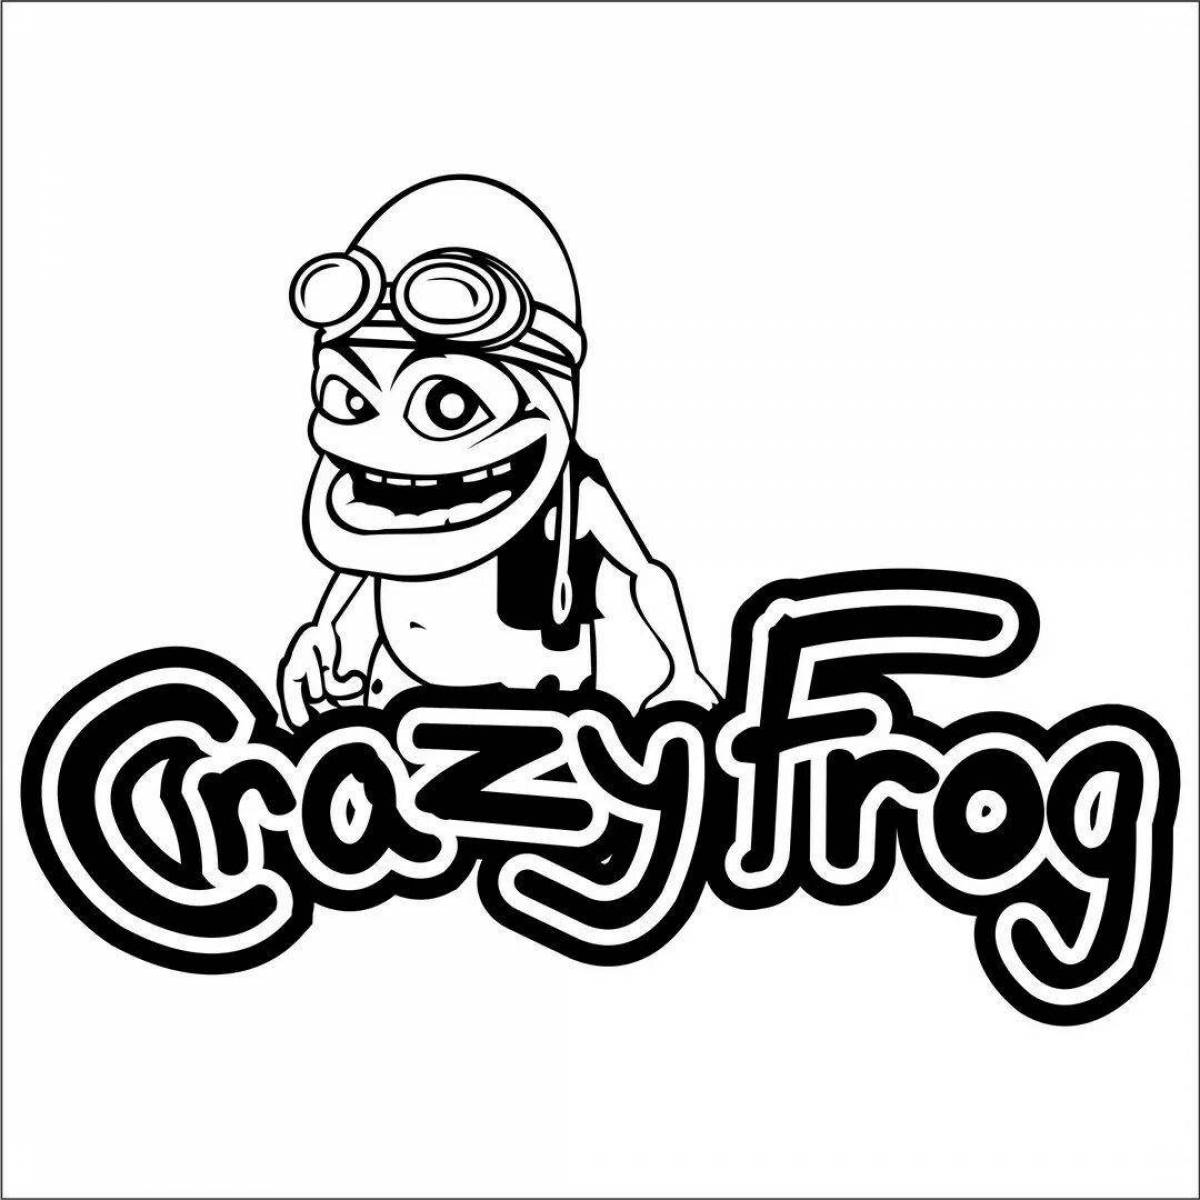 Coloring page glowing crazy frog